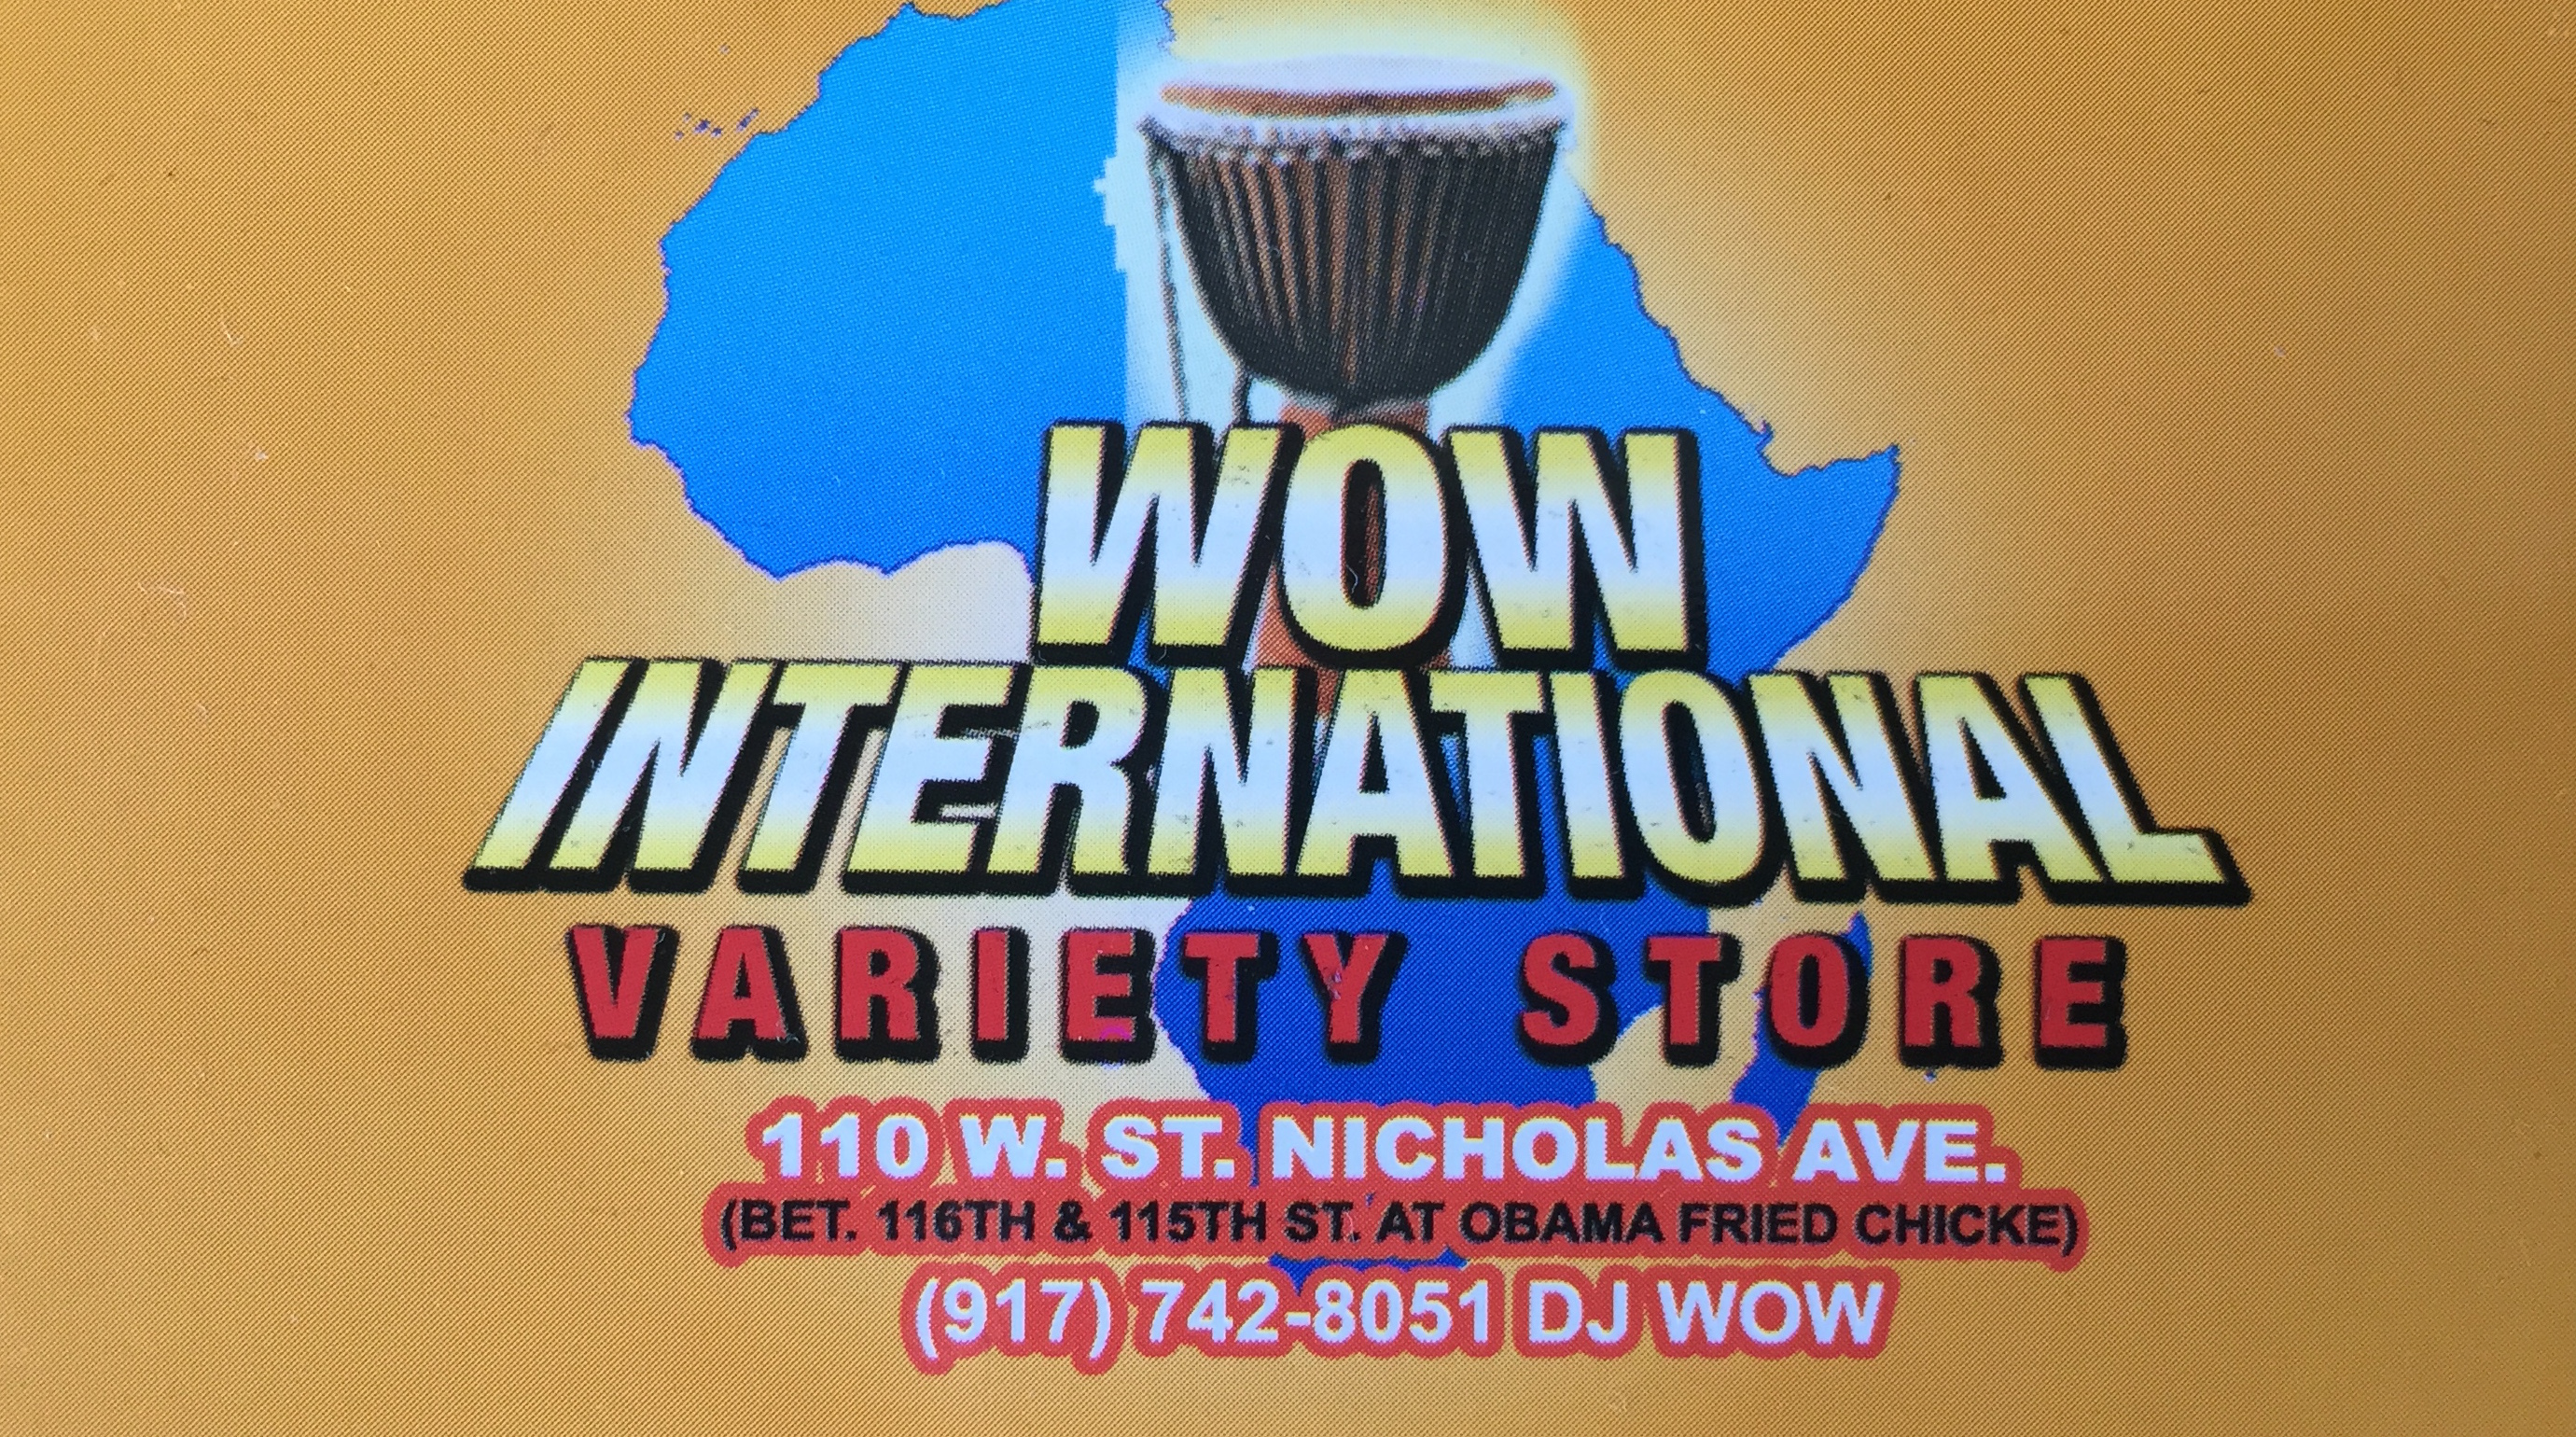 DJ Wow's African CD Shop in Harlem